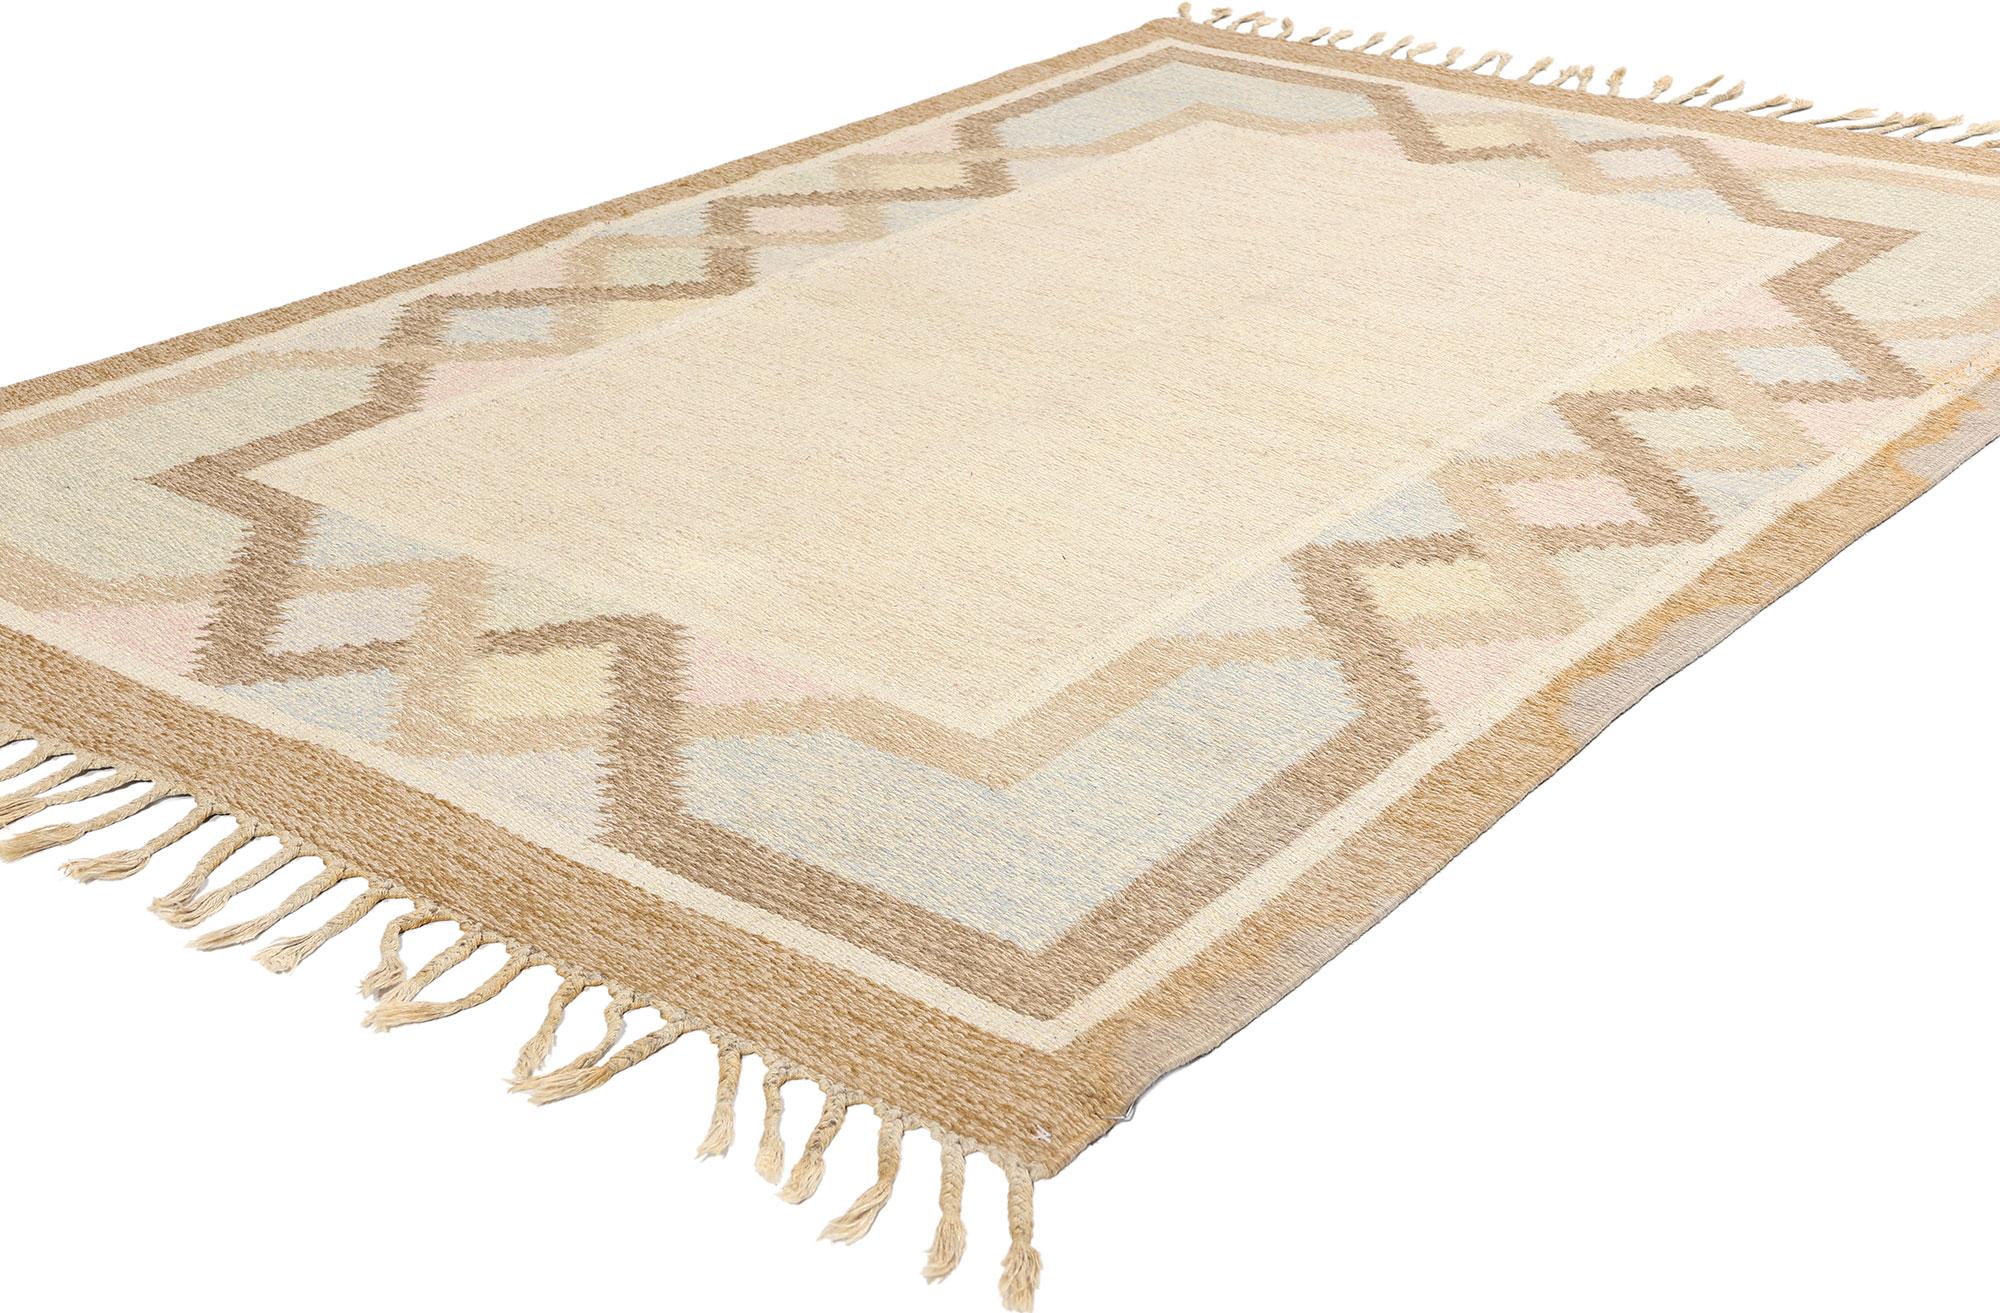 78254 Anna Johanna Angstrom Vintage Swedish Rollakan Rug, 04'05 x 06'08. Anna Johanna Angstrom (1894-1983) stands as a prominent figure in Swedish textile design, embodying the quintessence of early to mid-20th century Scandinavian aesthetic.